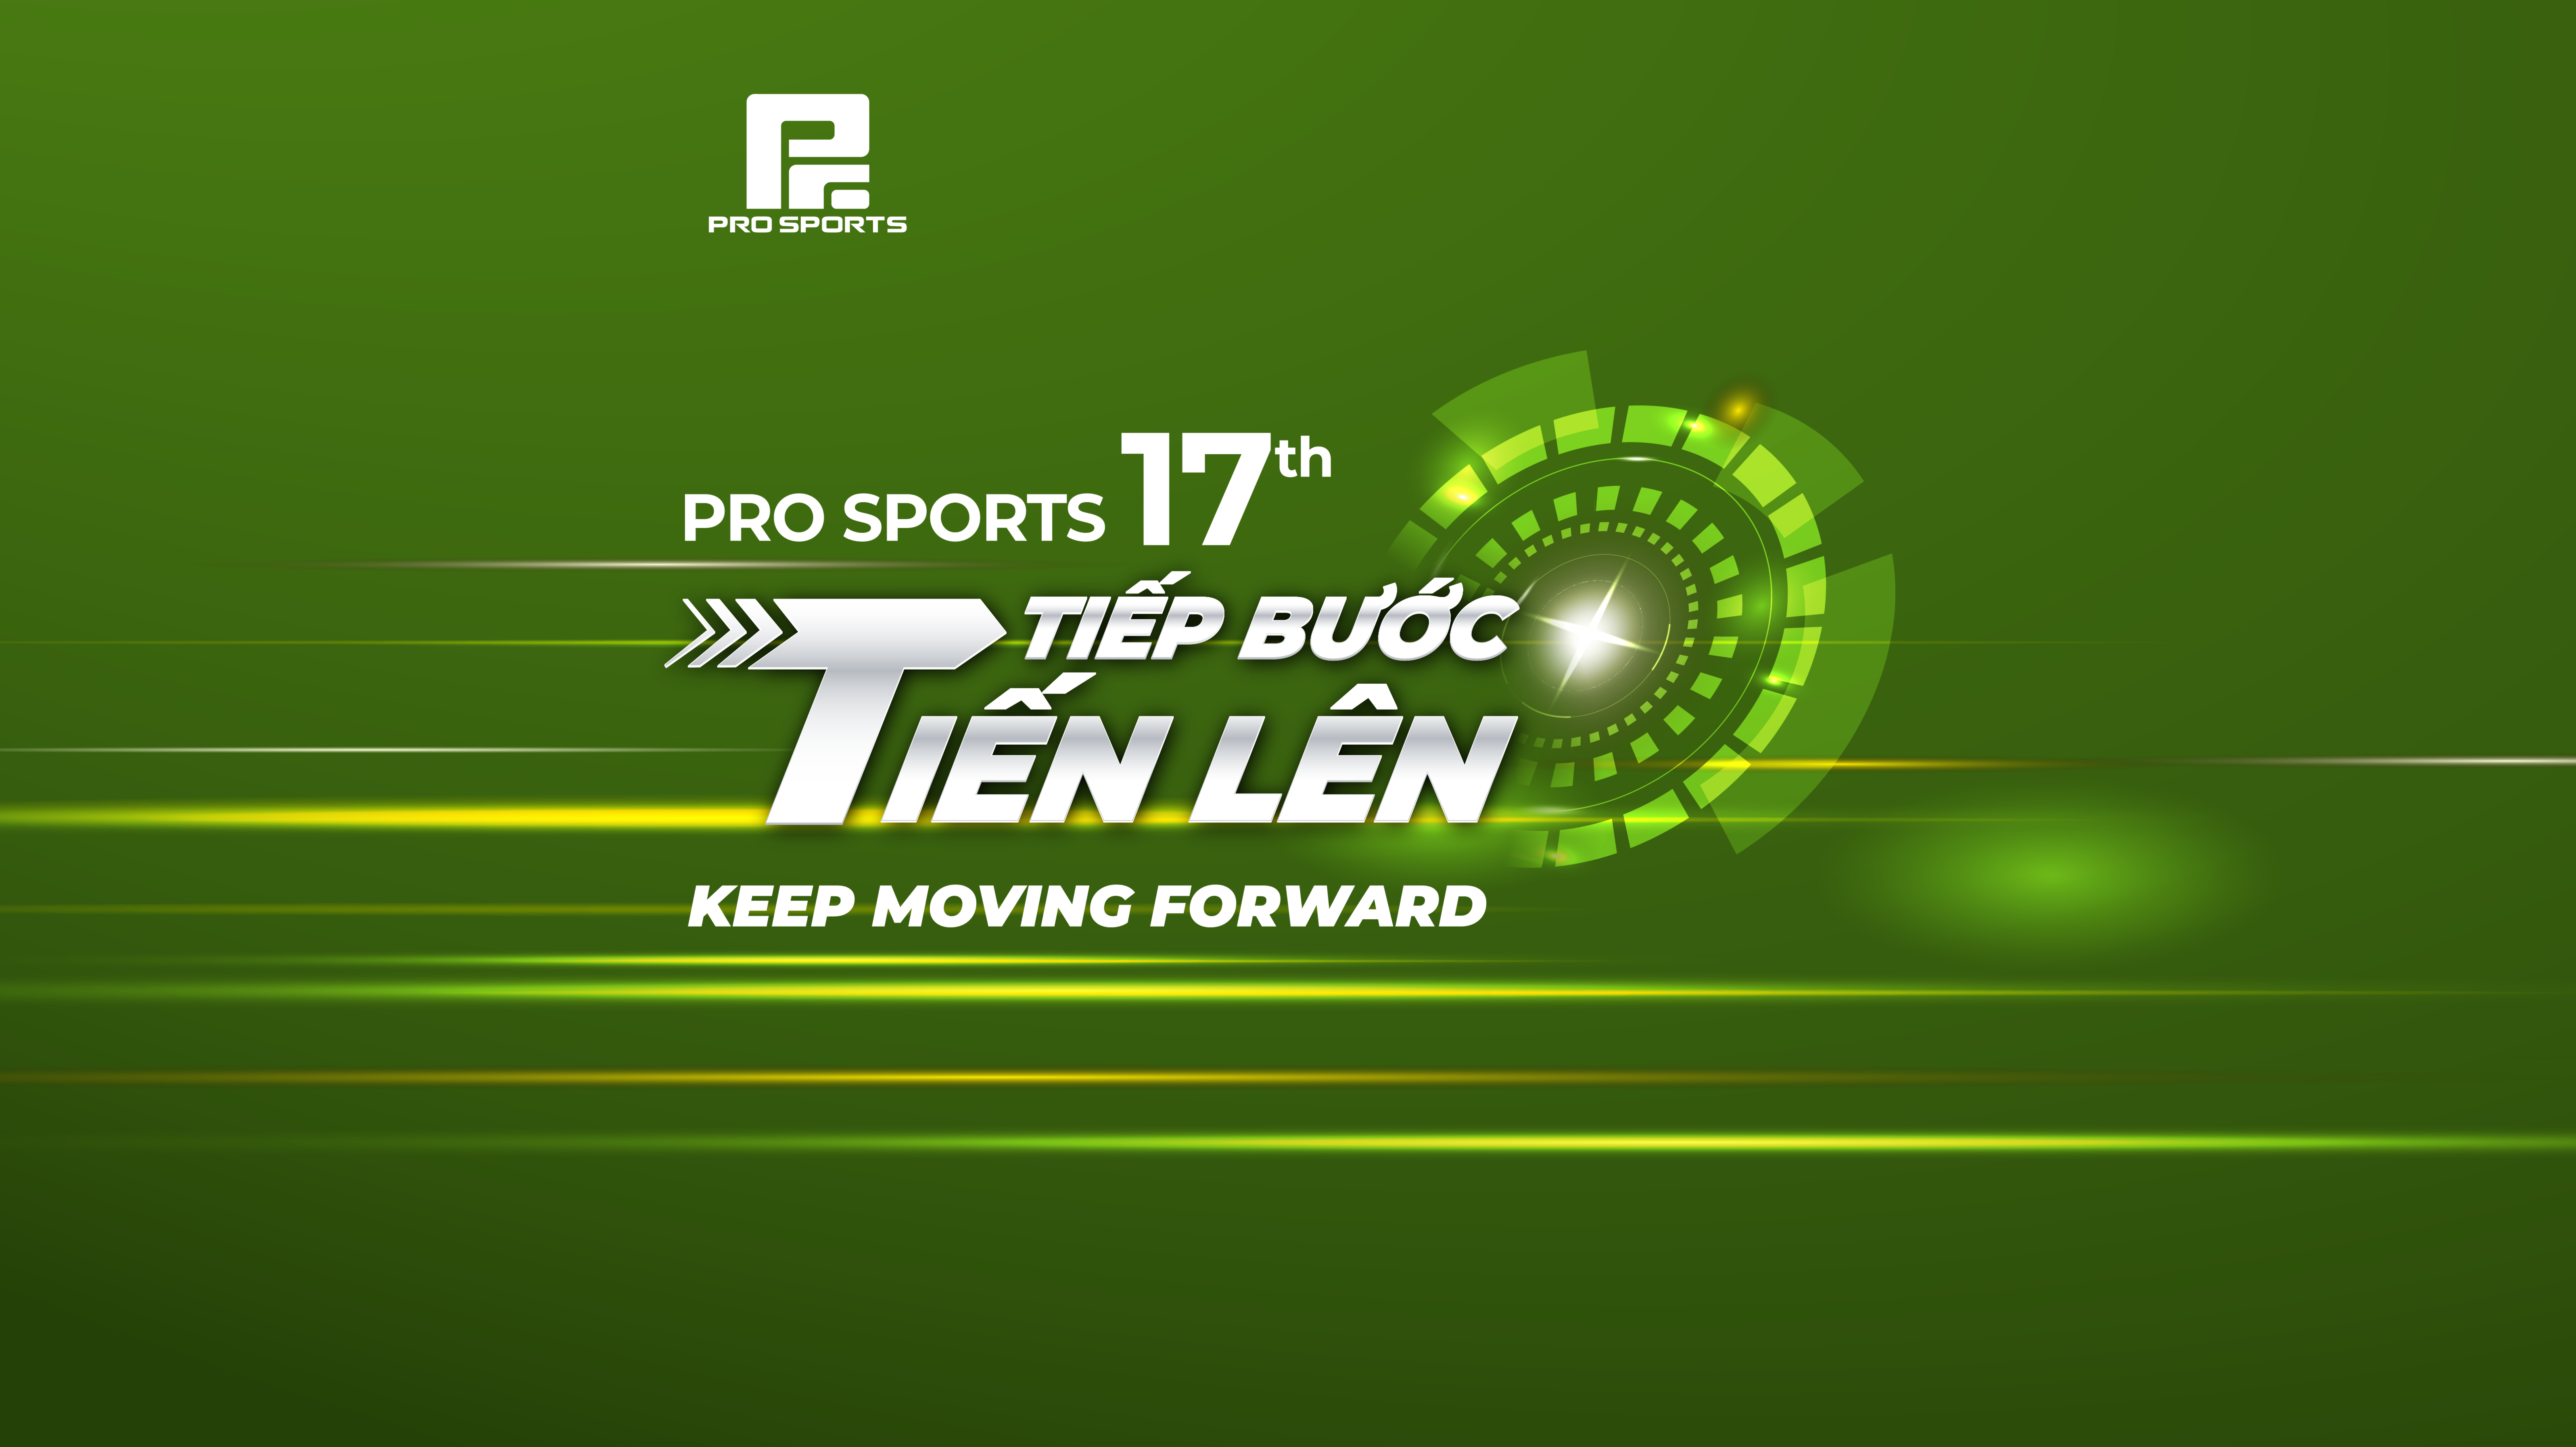 Celebrating 17 Years of Pro Sports - CONTINUING TO ADVANCE on the Journey to Conquer